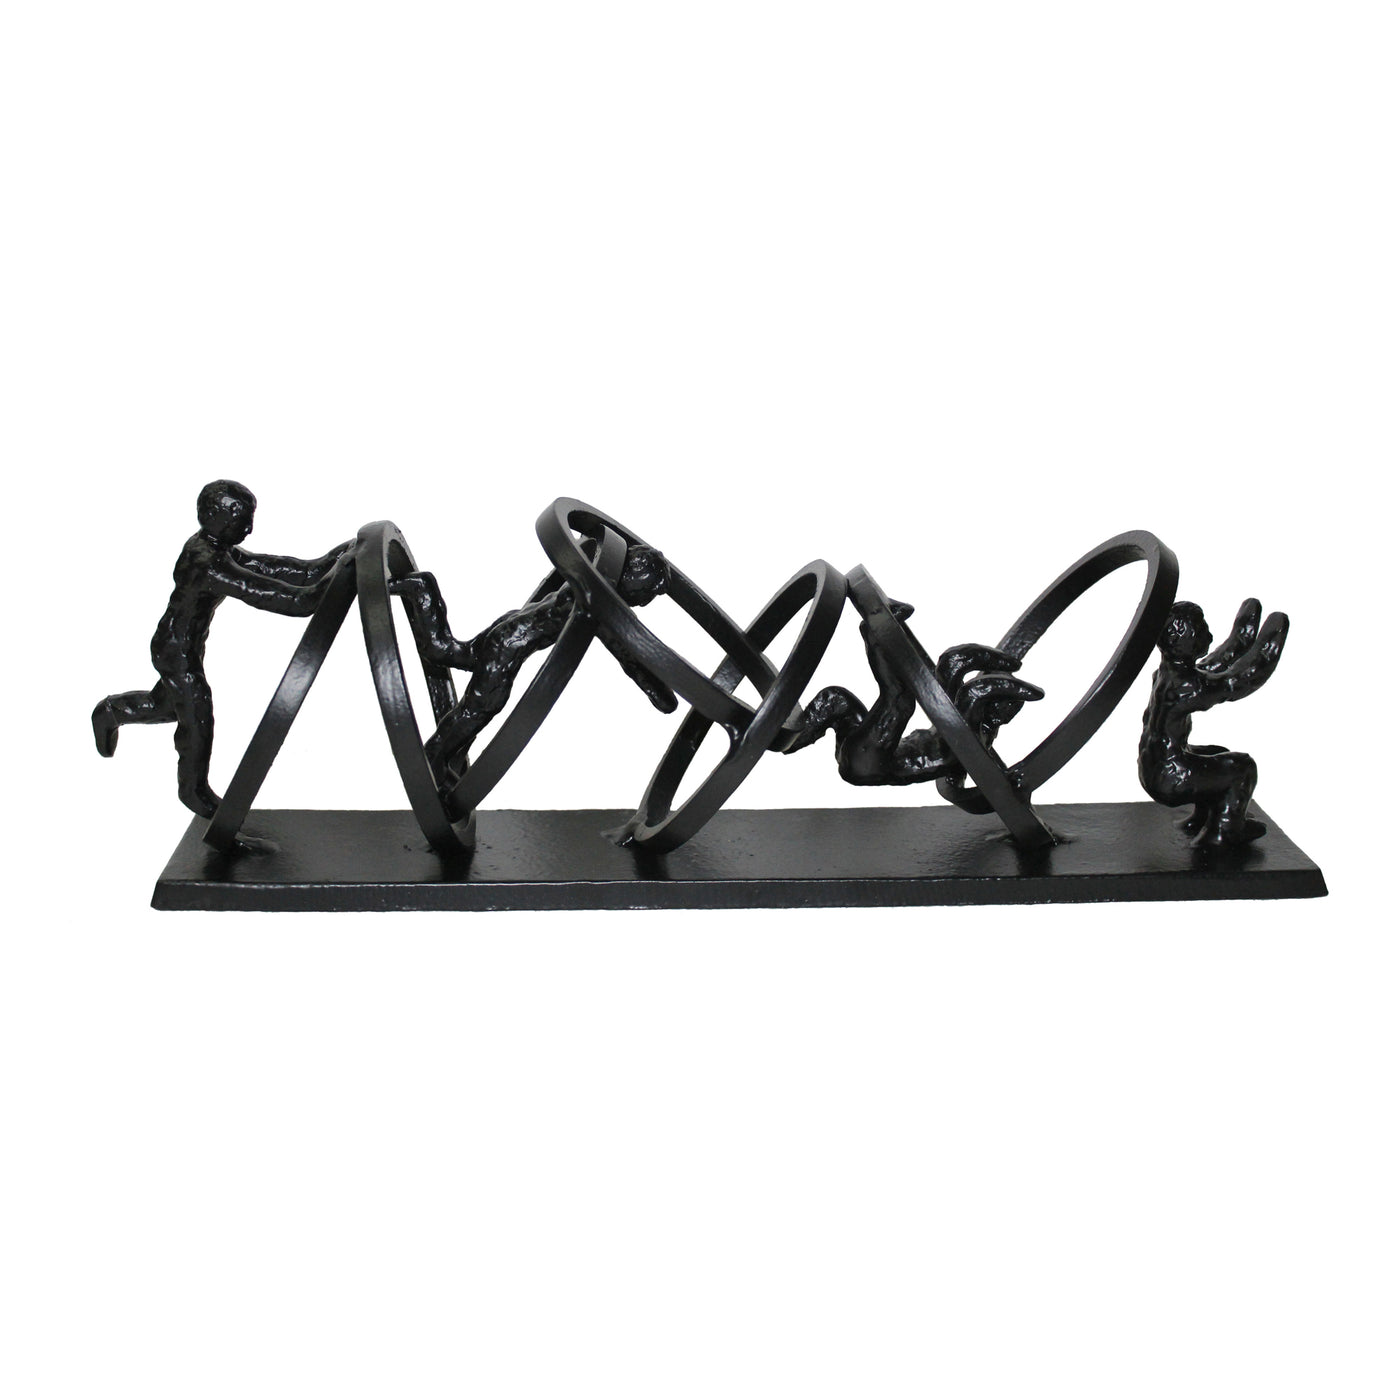 Bring some discreet playfulness in your home with the Acrobats. Its made from solid aluminum in black finish making a perf...